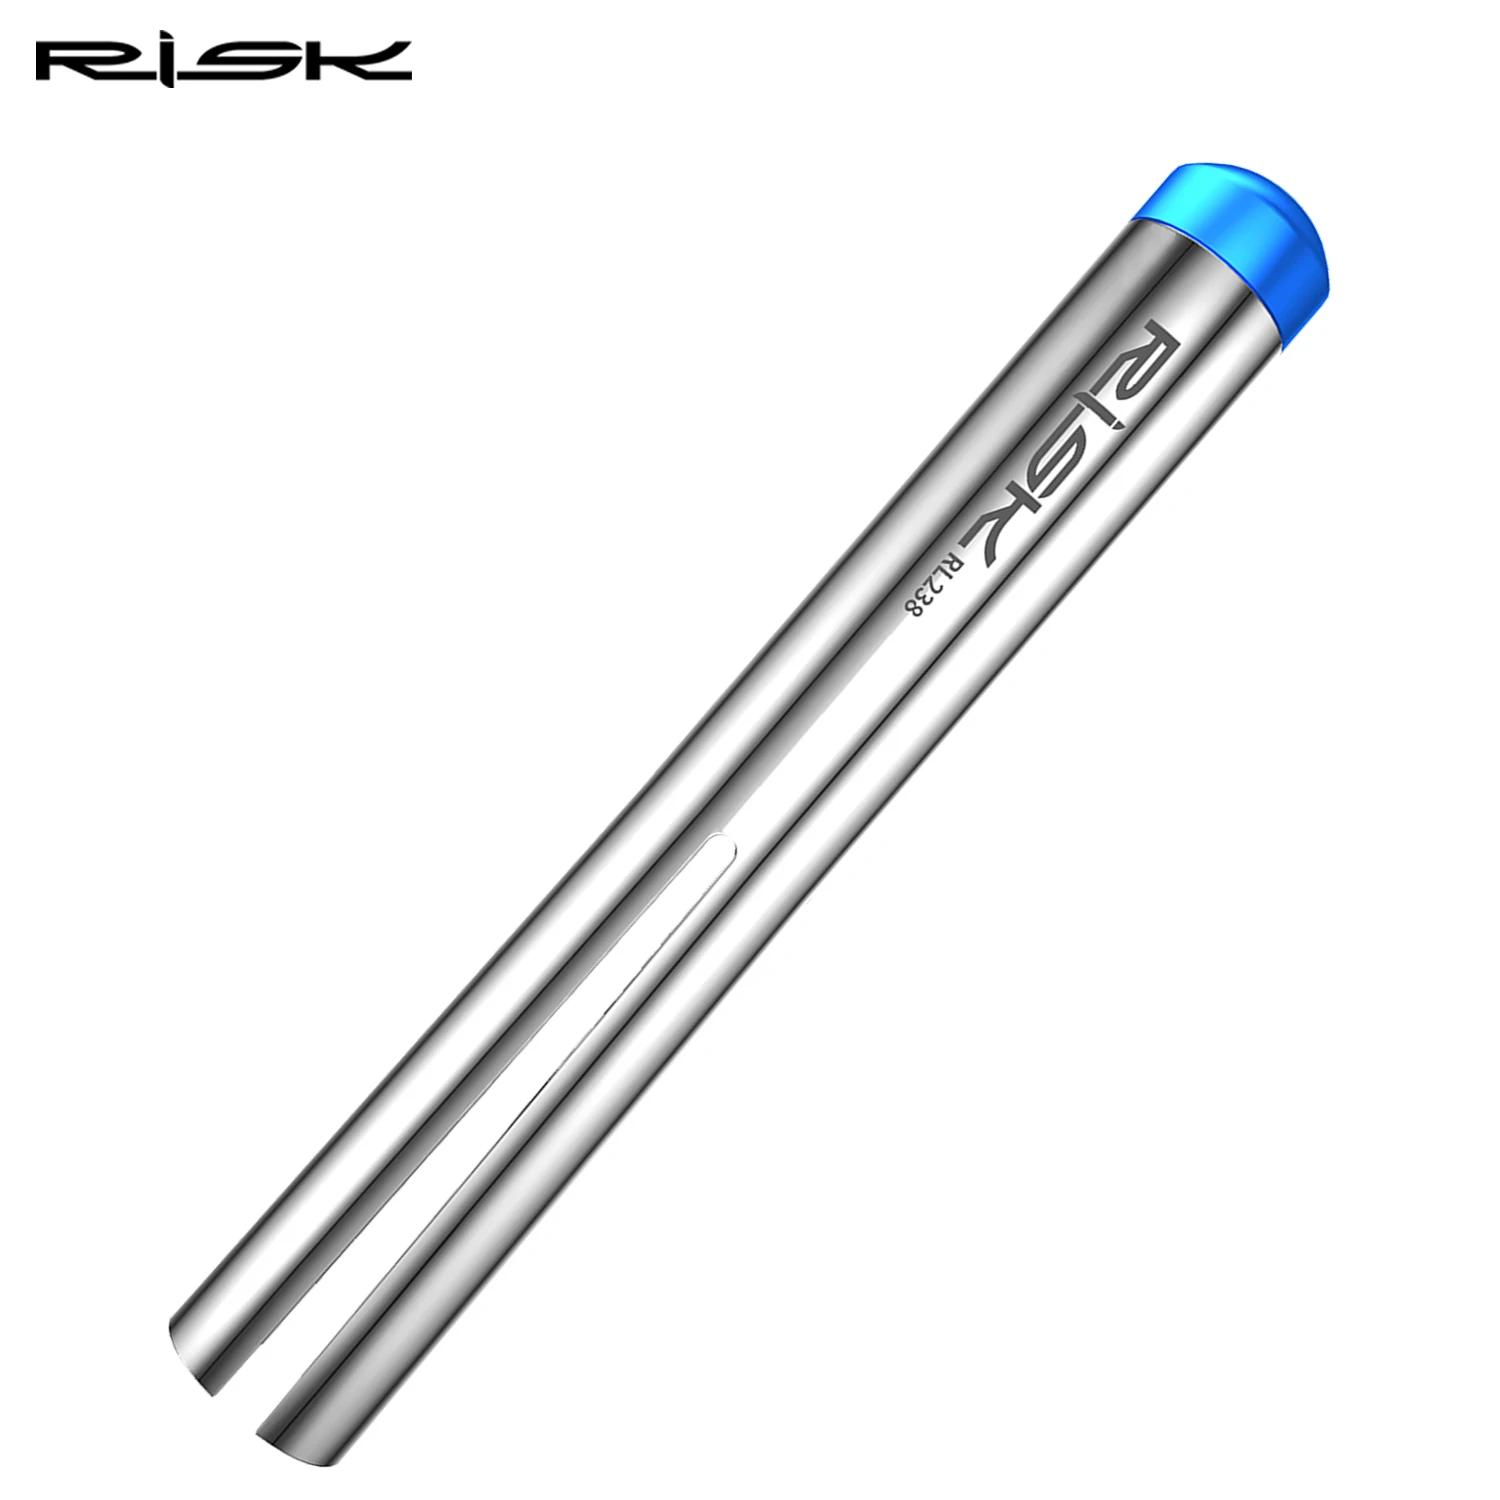 RISK RL238 Bike Bicycle 22-24mm Spindle Press Fit BB Bottom Bracket Cup Bearing Removal Tool Remover BB86 PF30 BB92 Crankset